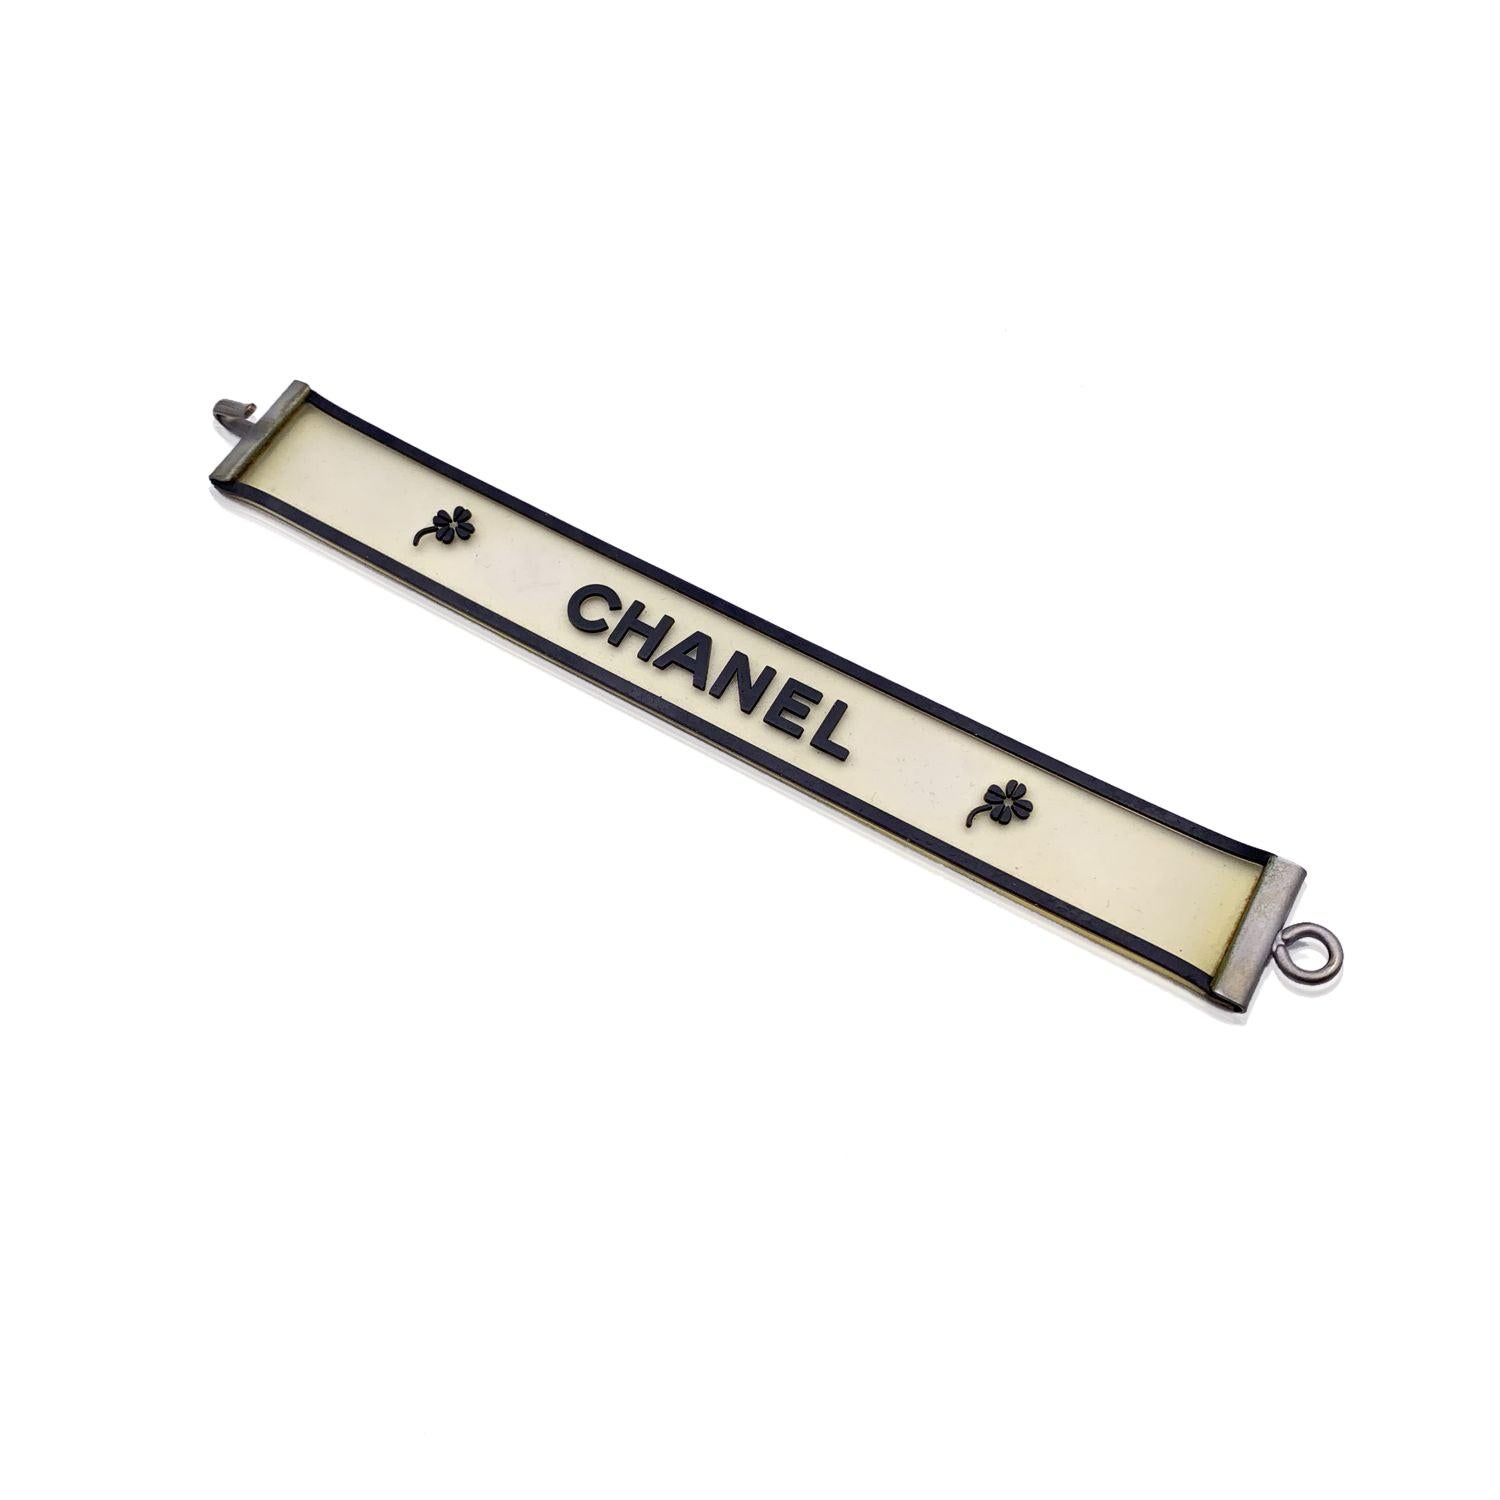 Lovely bracelet by CHANEL, crafted of clear and black silicone. It features black CHANEL writing between 2 quatrefoil. Hook closure 'Chanel 01 CC A Made in France' oval hallmark near the closure. Total lenght: 7 inches - 17.7 cm . Condition A -